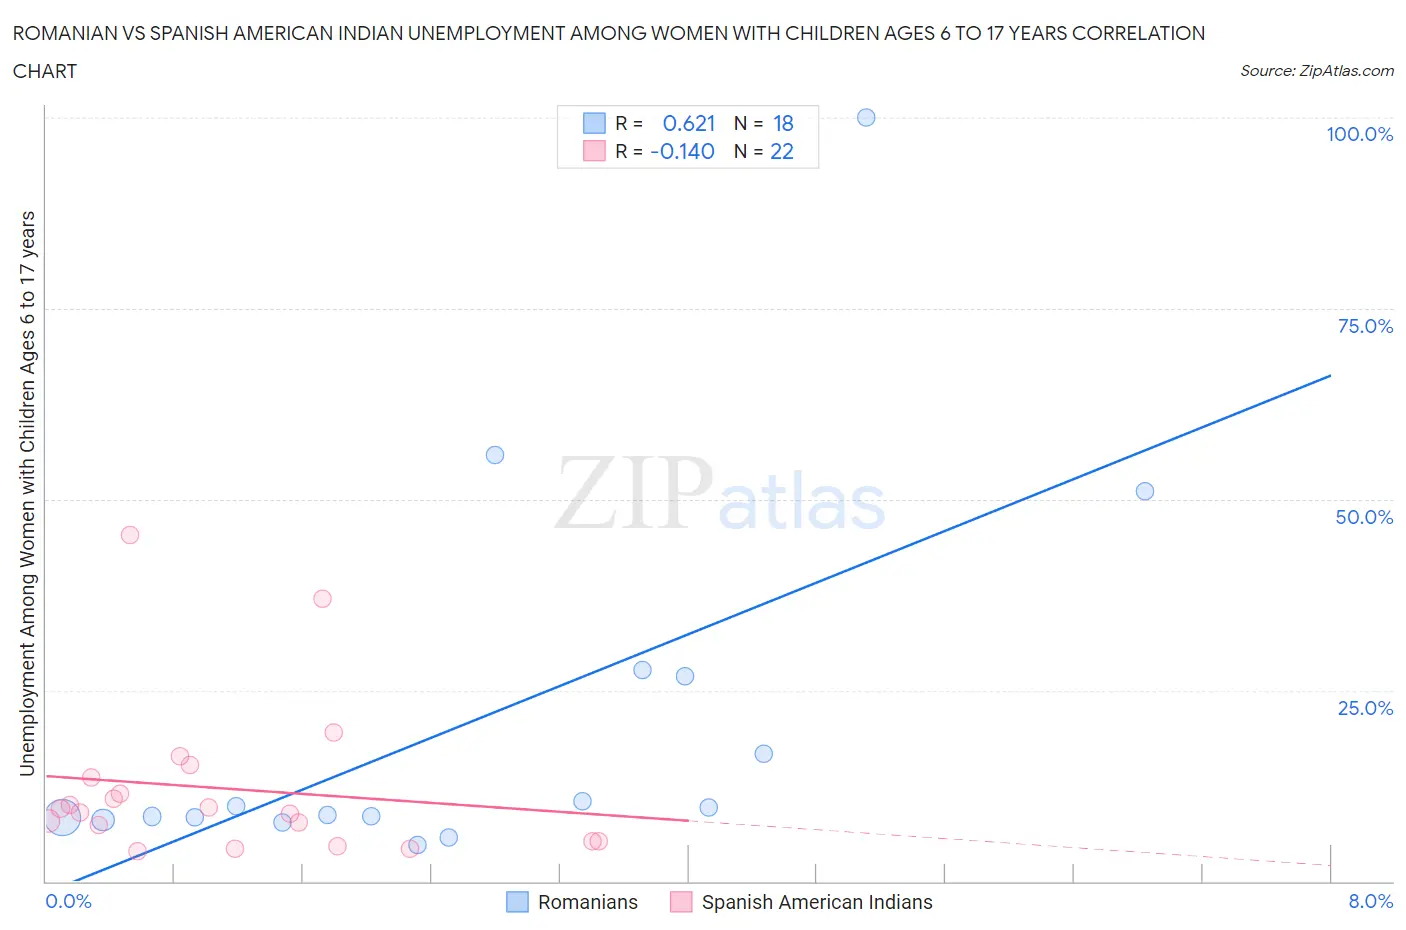 Romanian vs Spanish American Indian Unemployment Among Women with Children Ages 6 to 17 years